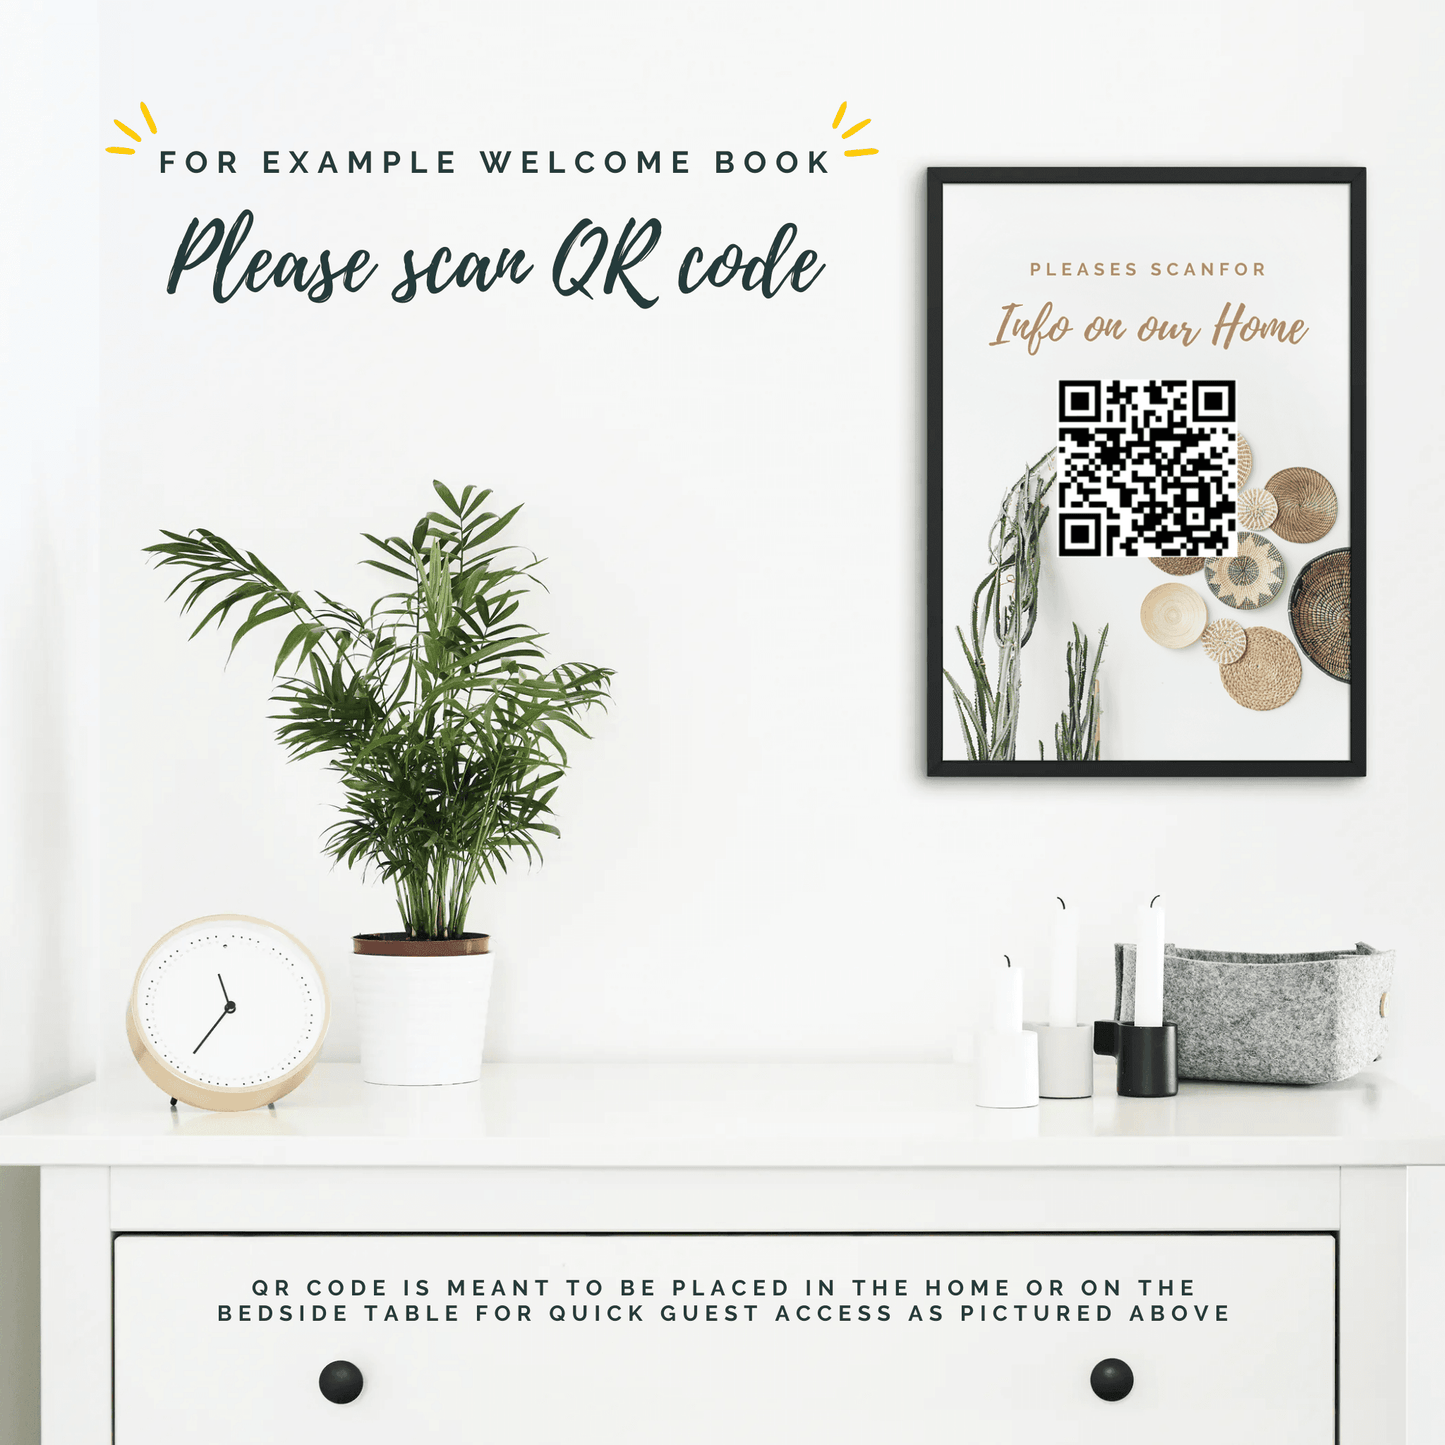 Custom Digital Welcome Books Your Guests Will Love - Kind Designs